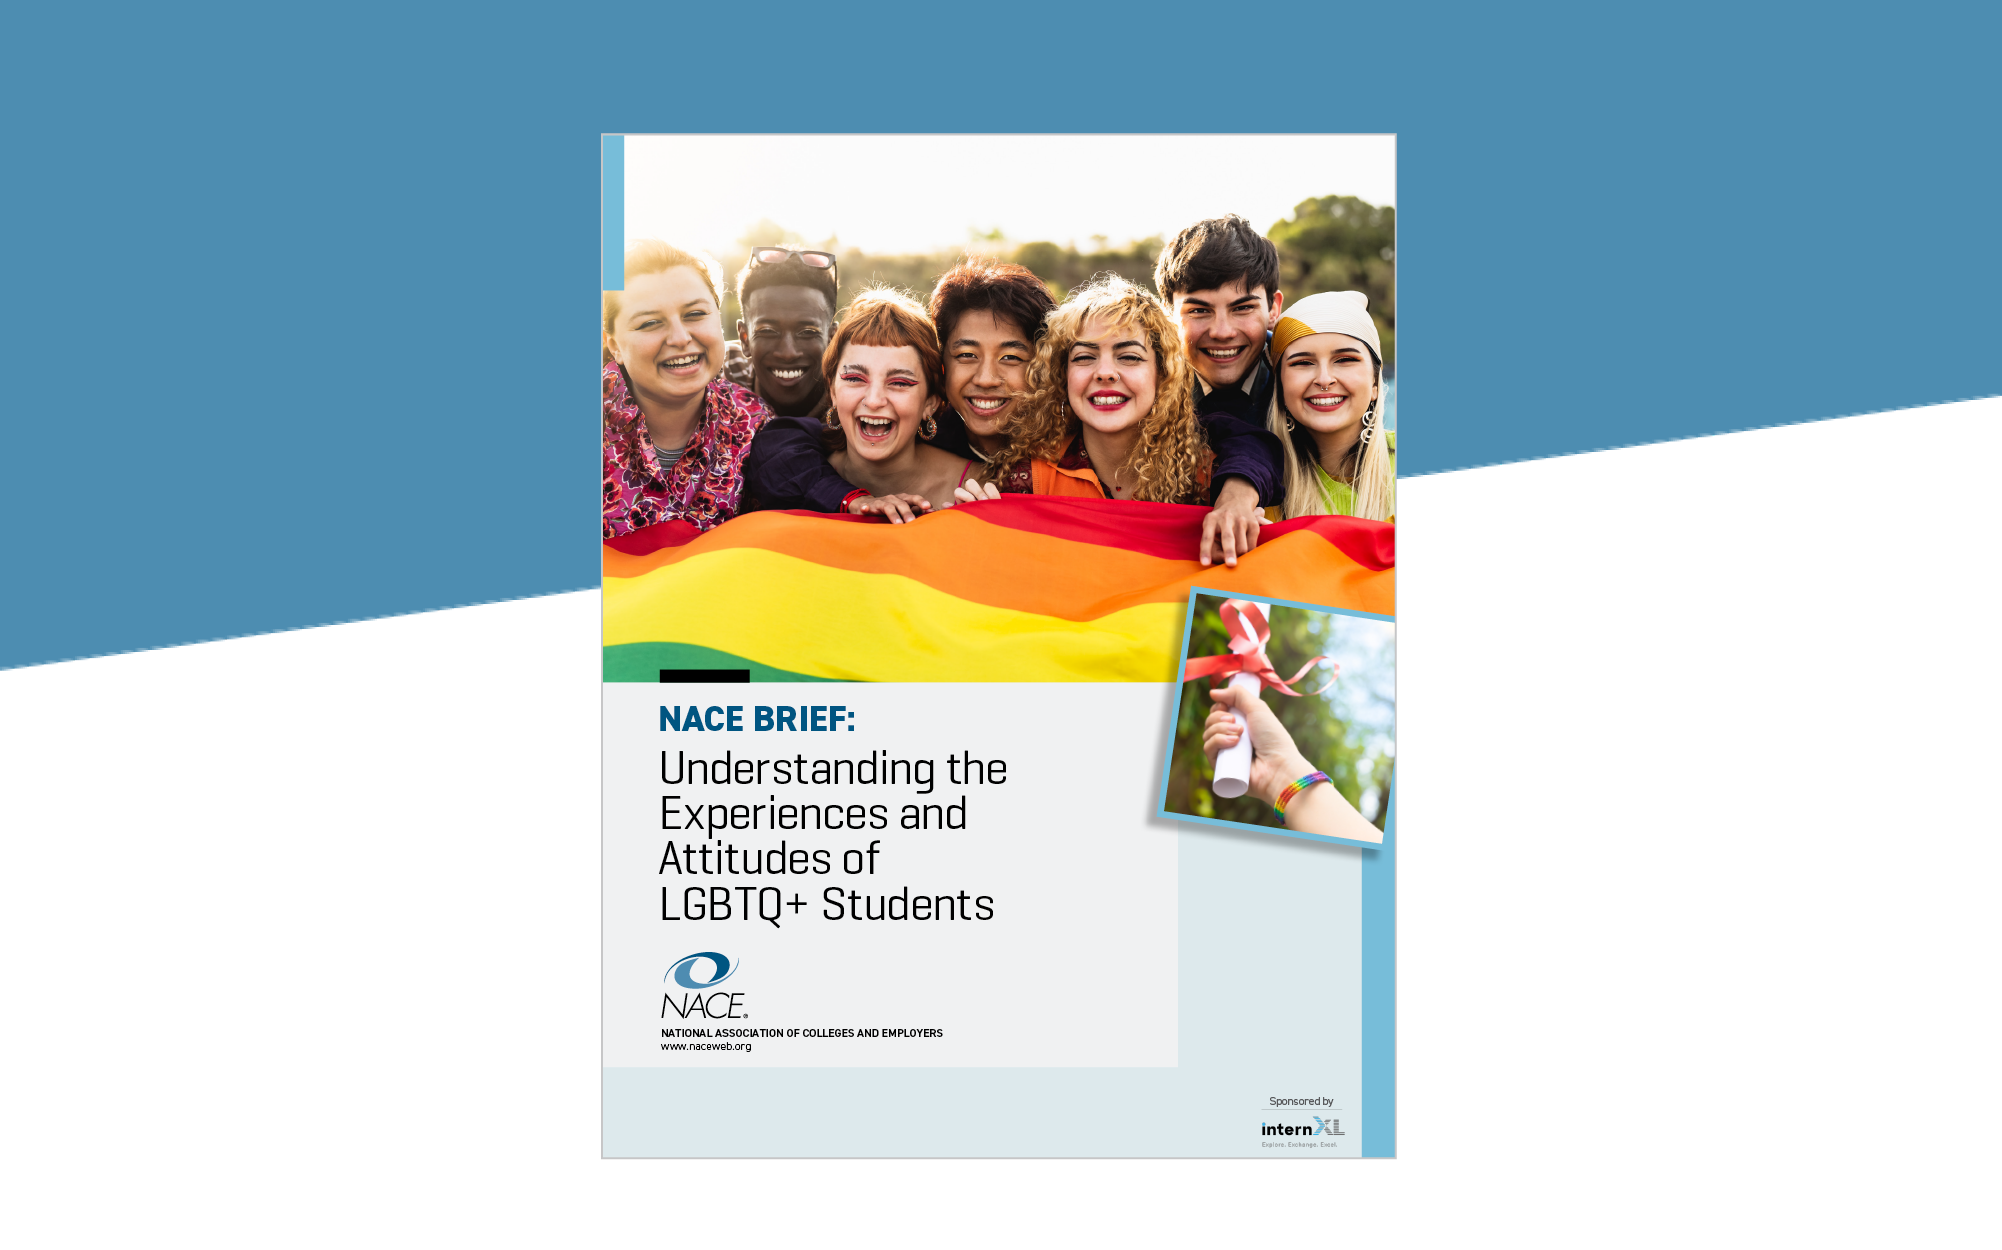 NACE Brief: Understanding the Experiences and Attitudes of LGBTQ+ Students